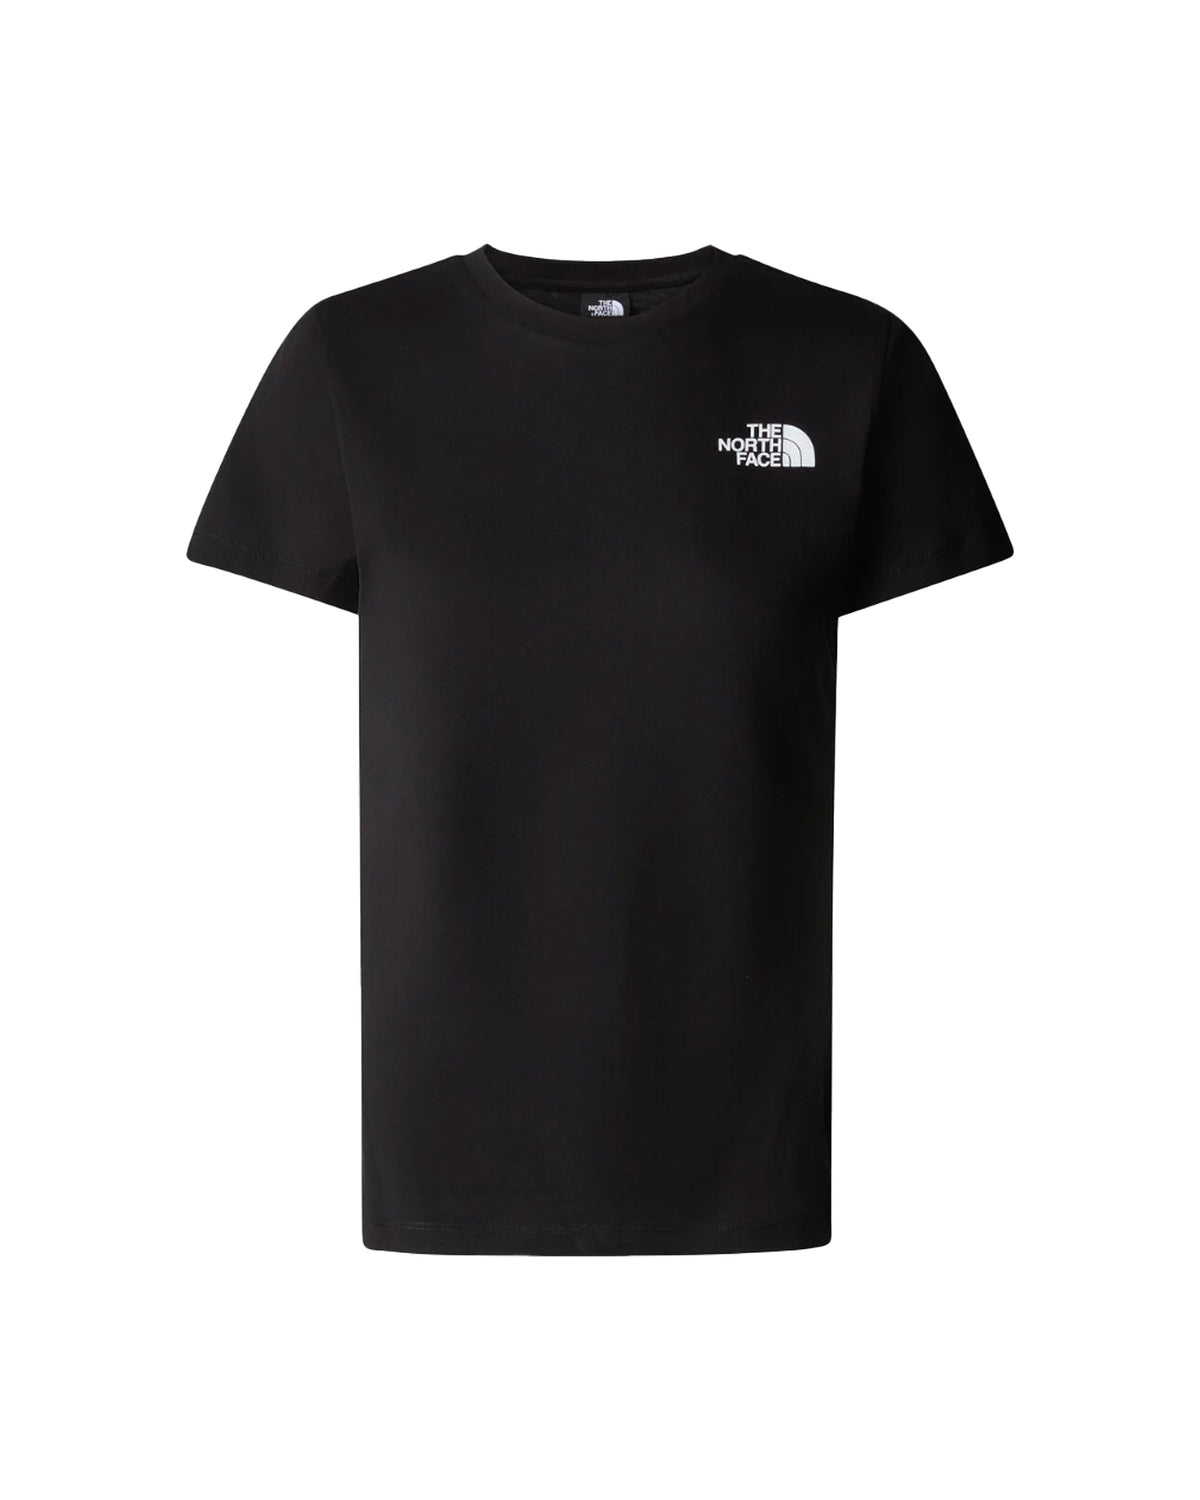 Woman's Tee The North Face Redbox Black